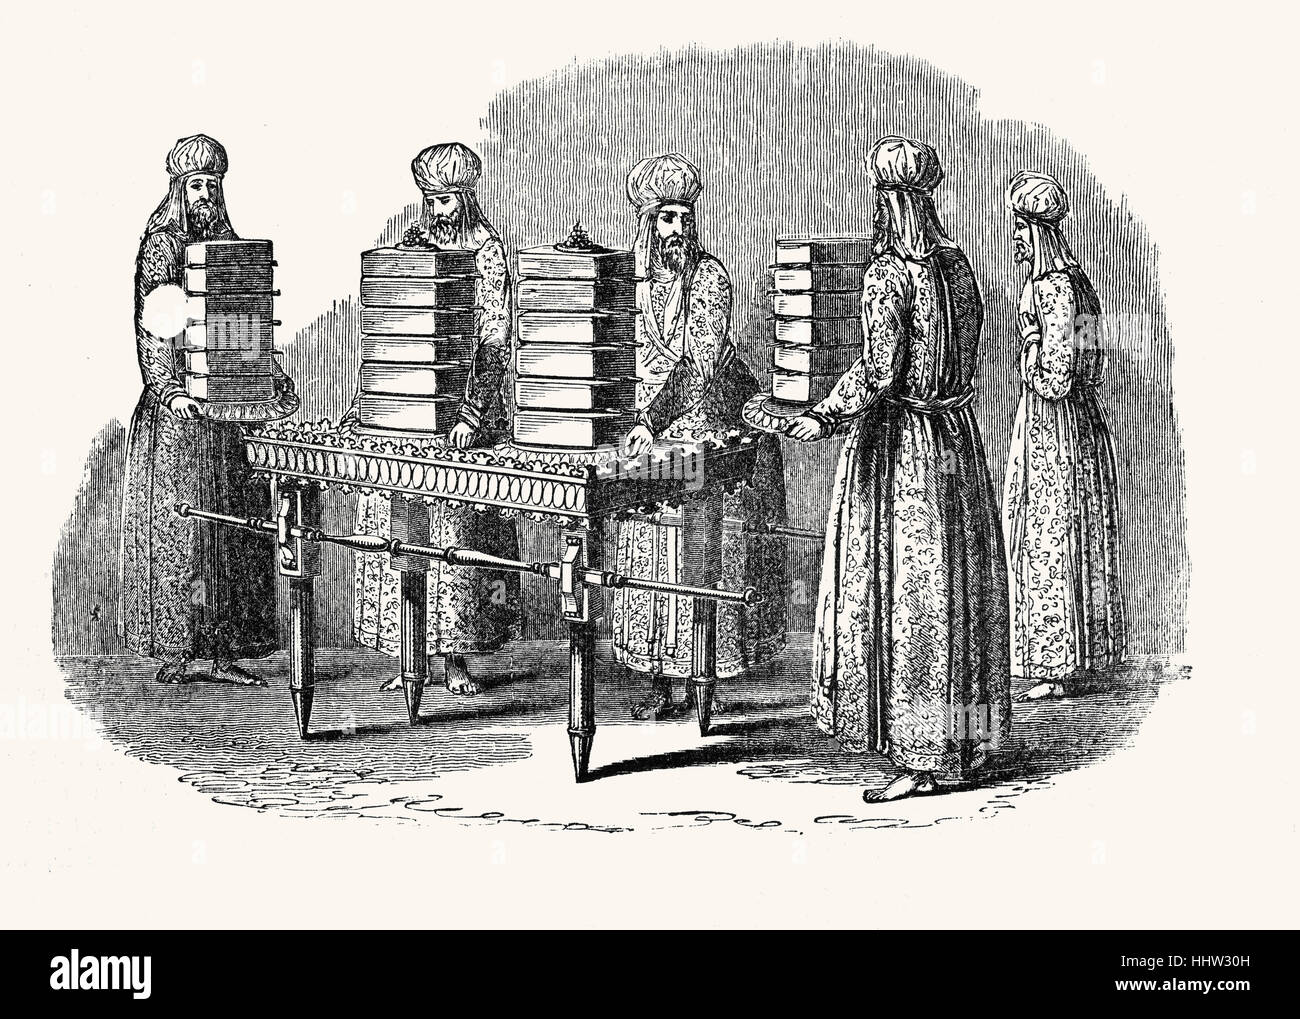 Table of showbread, high priests replacing old loaves with new (12 loaves representing the 12 tribes of Israel). Exodus 25 verse 30 'And thou shalt set upon the table showbread before me always.' 19th century engraving. Stock Photo